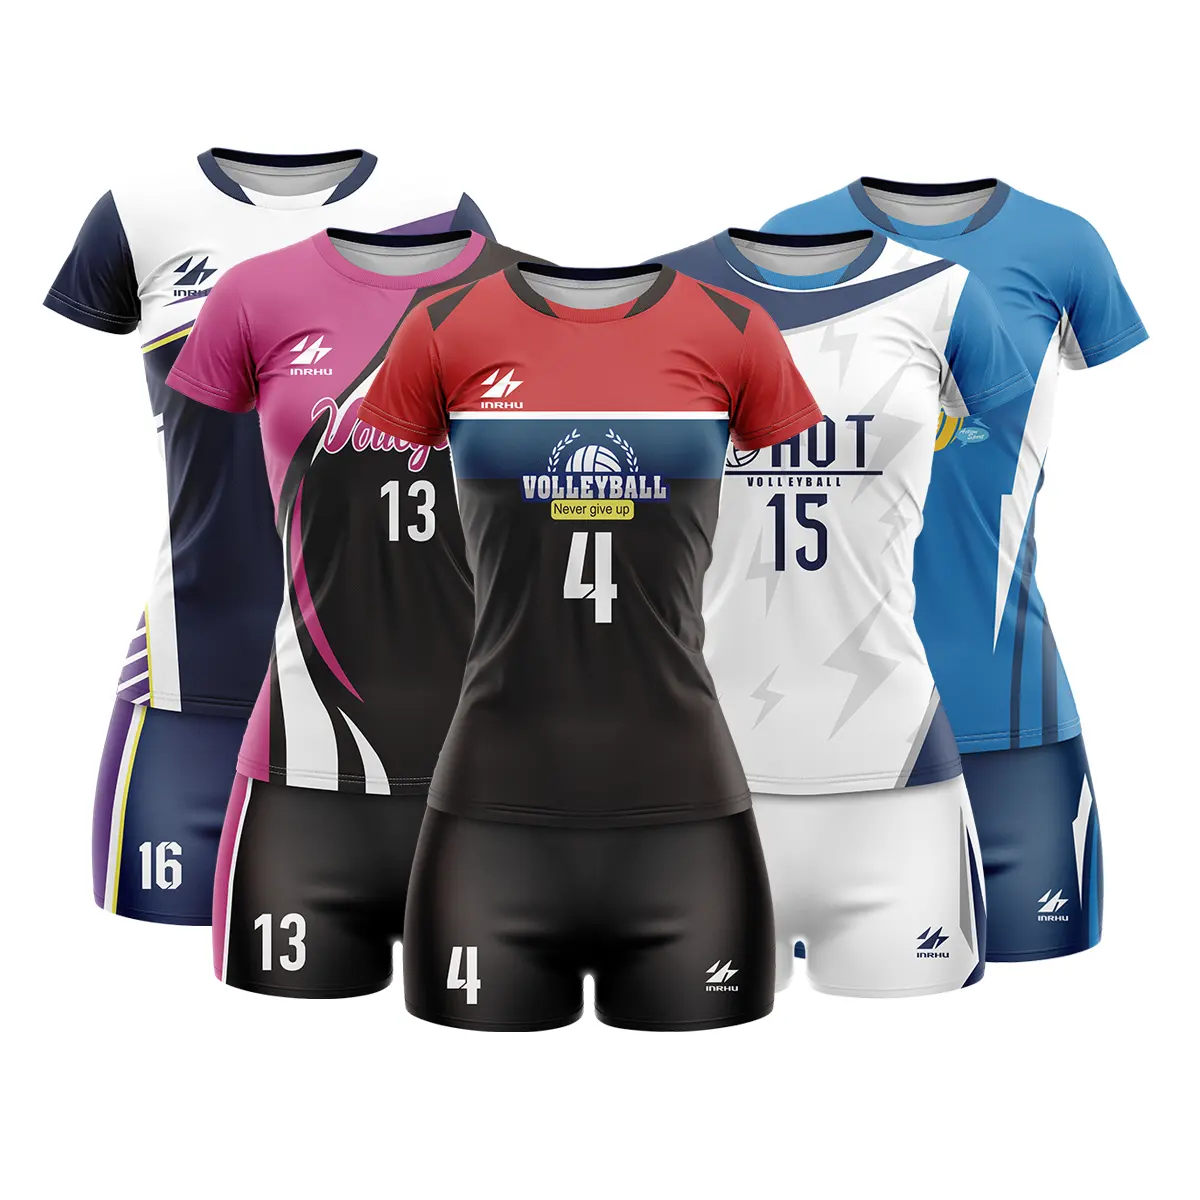 New Volleyball Suit Set Women's Full Body Customized Team Uniform Men's Air Volleyball Suit Sports Competition Training Suit